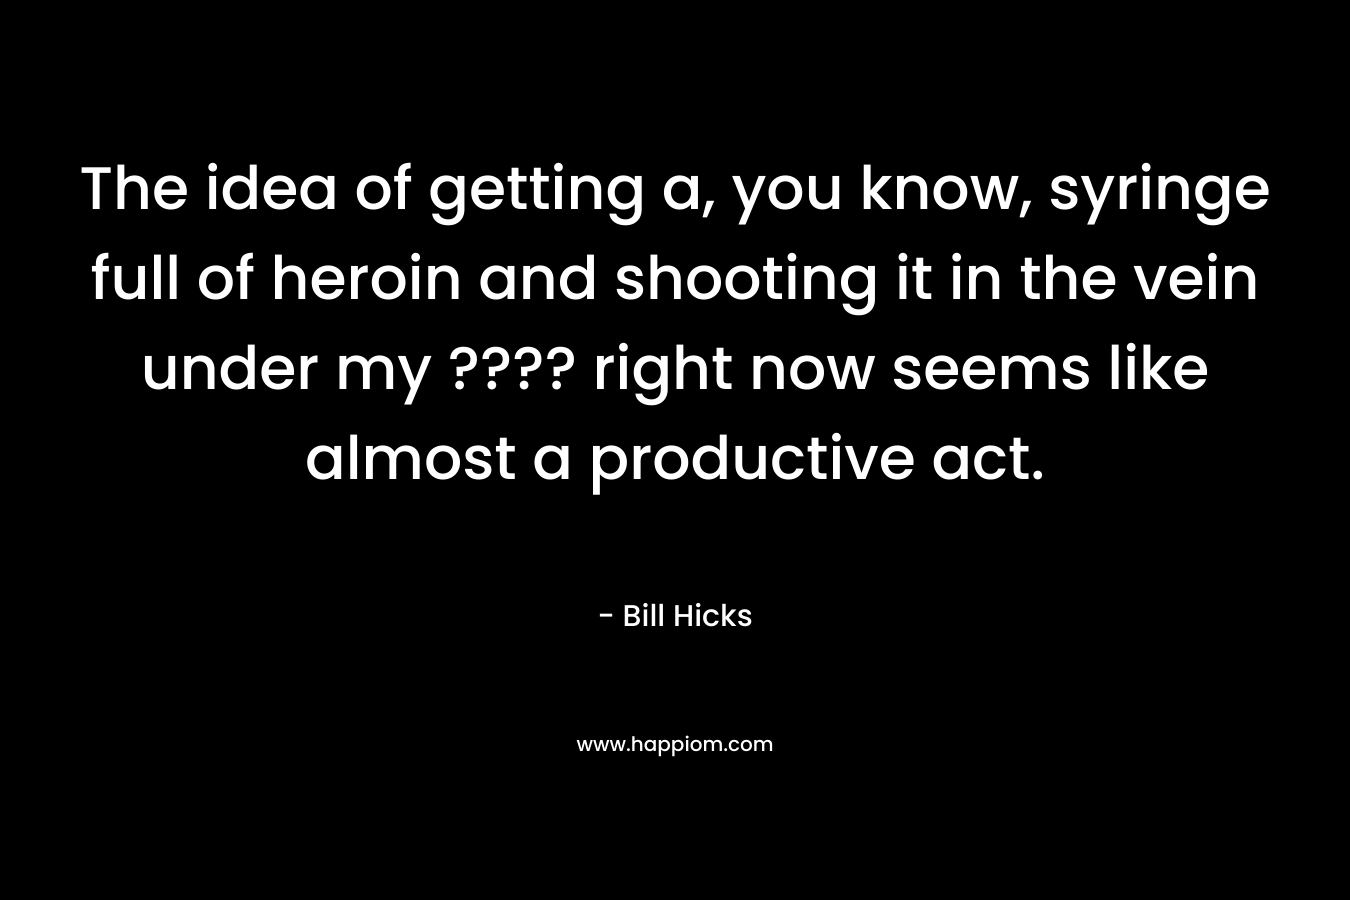 The idea of getting a, you know, syringe full of heroin and shooting it in the vein under my ???? right now seems like almost a productive act. – Bill Hicks